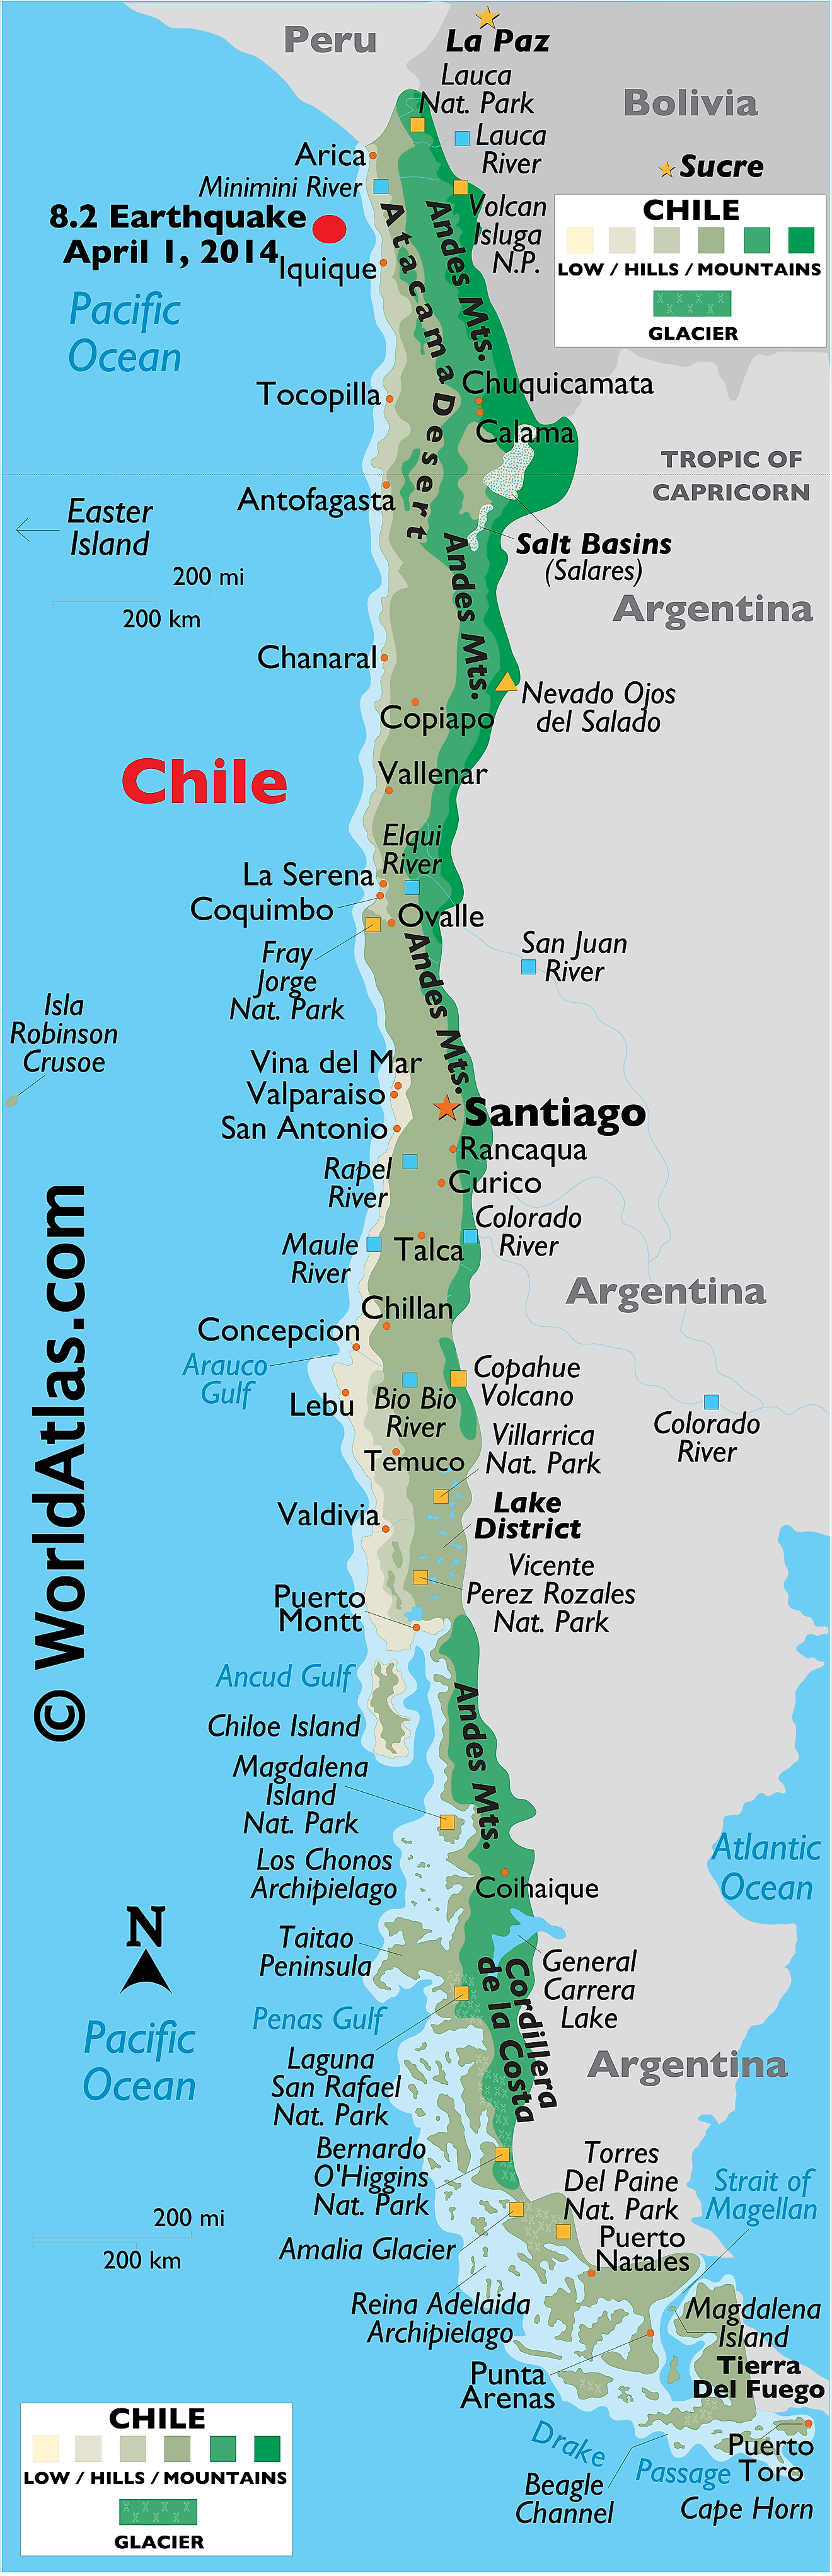 Physical Map of Chile showing relief, rivers, mountains ranges, major lakes, important cities, bordering countries, and more.